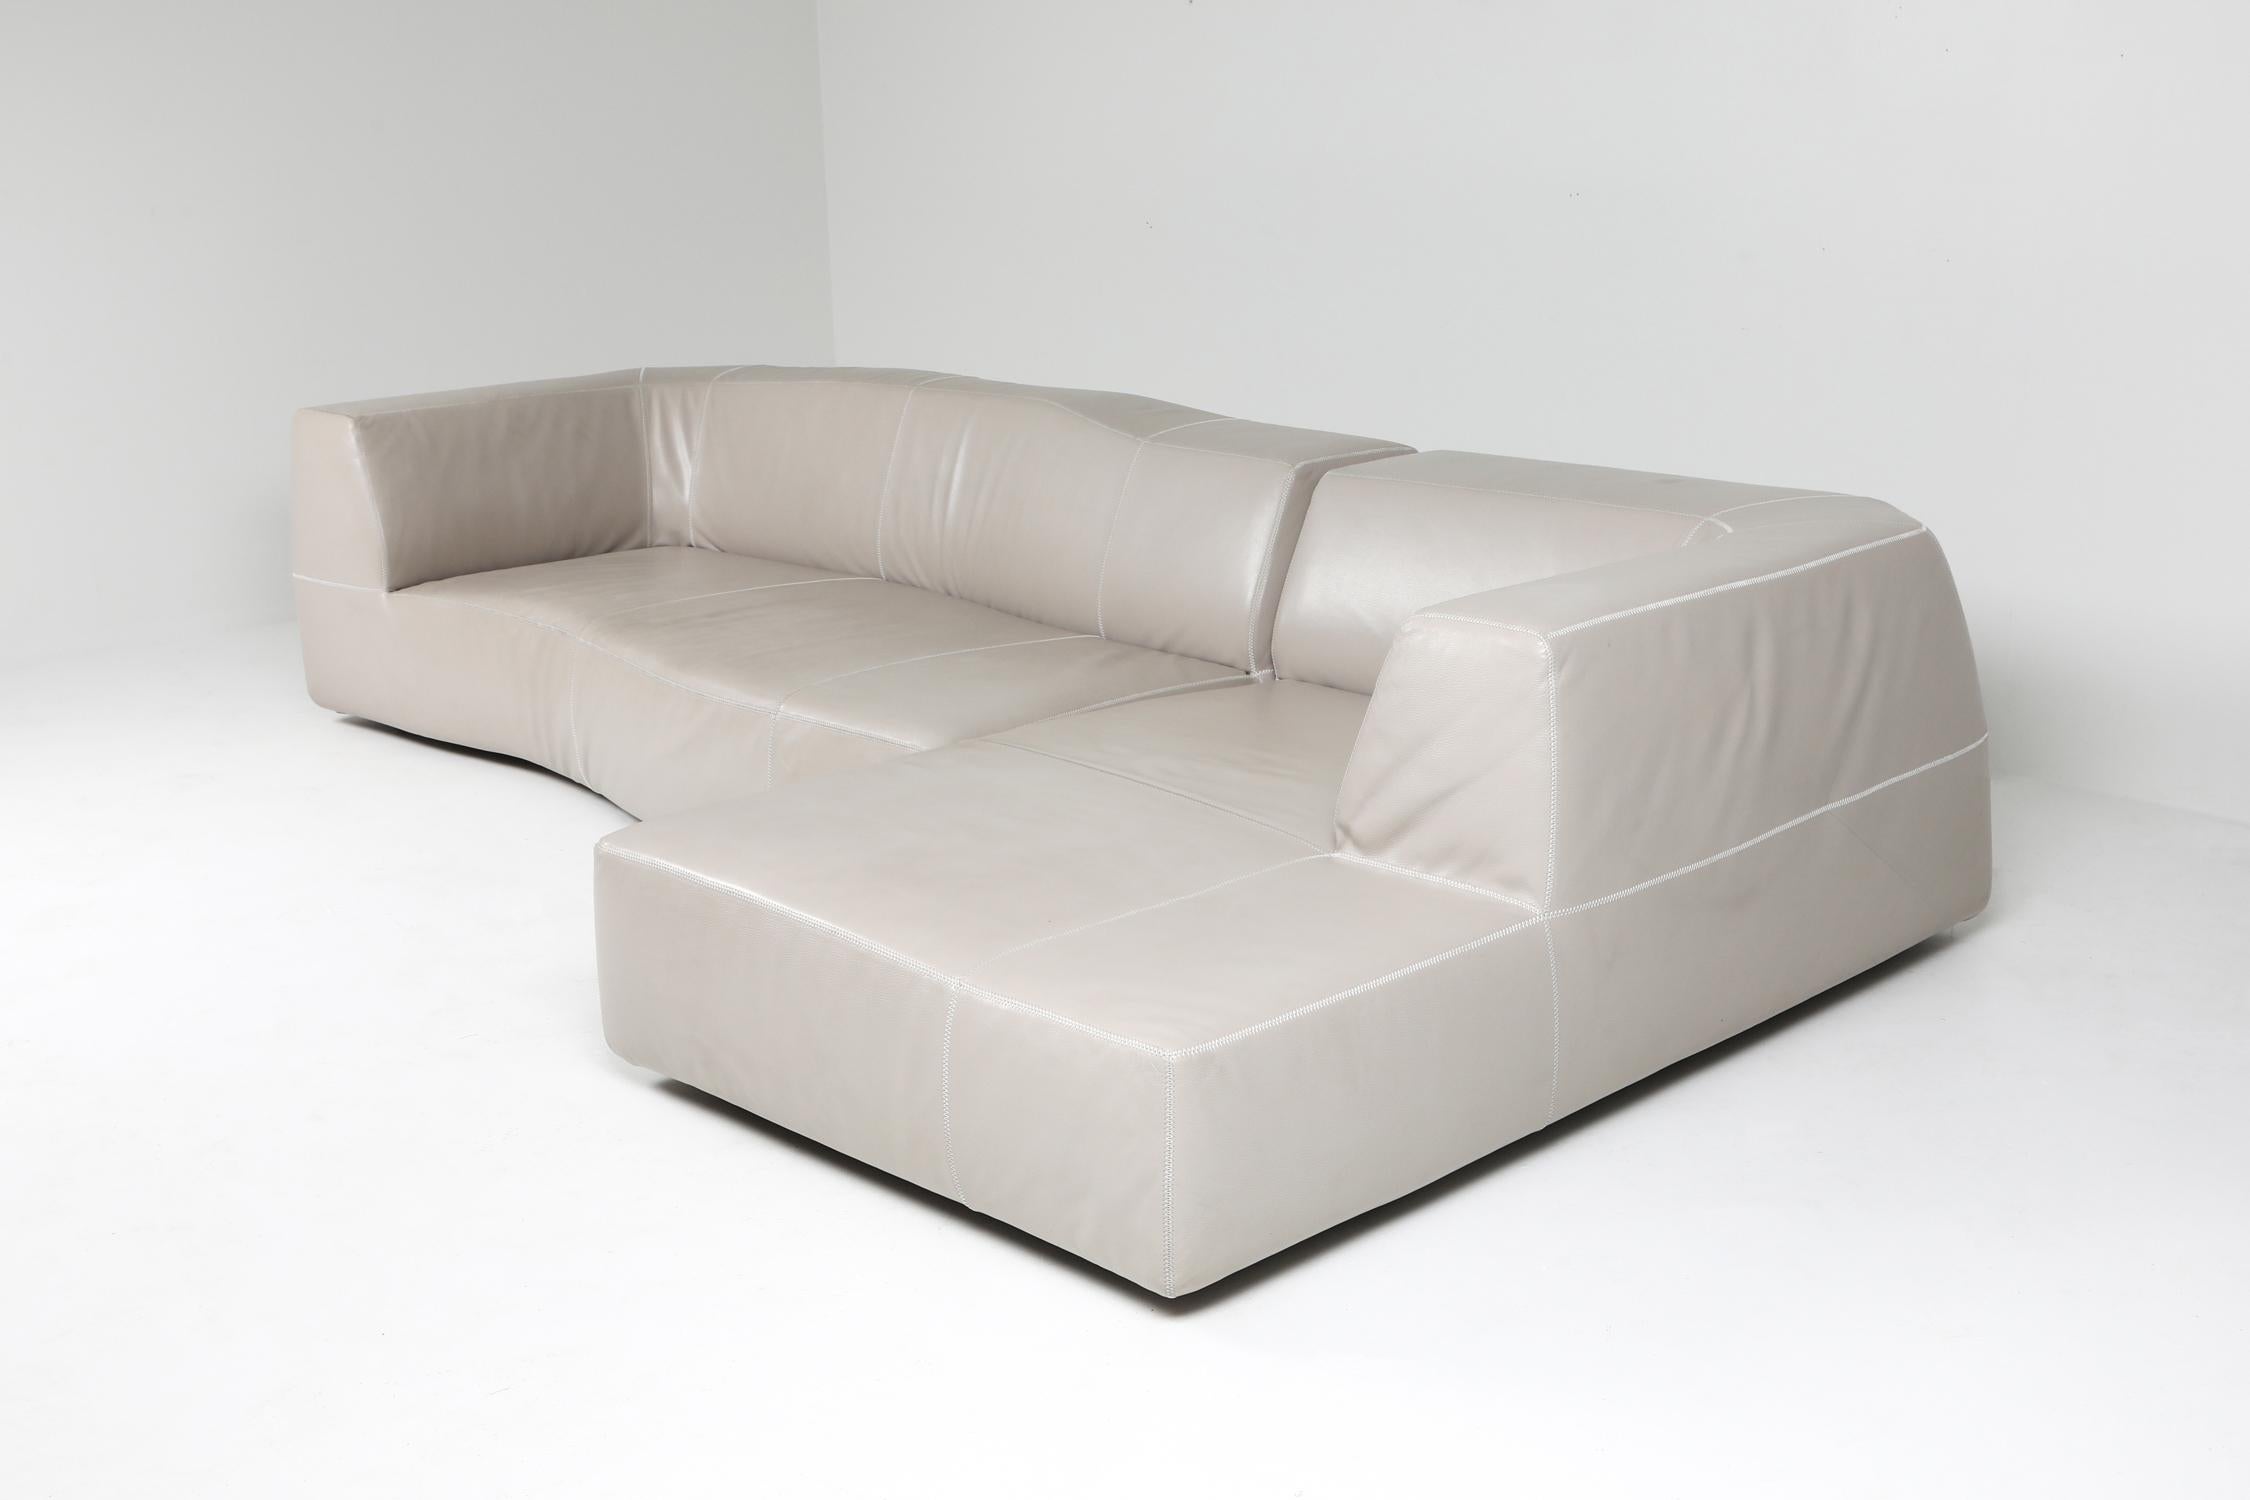 Post-Modern B&B Italia sectional couch 'Bend' by Patricia Urquiola